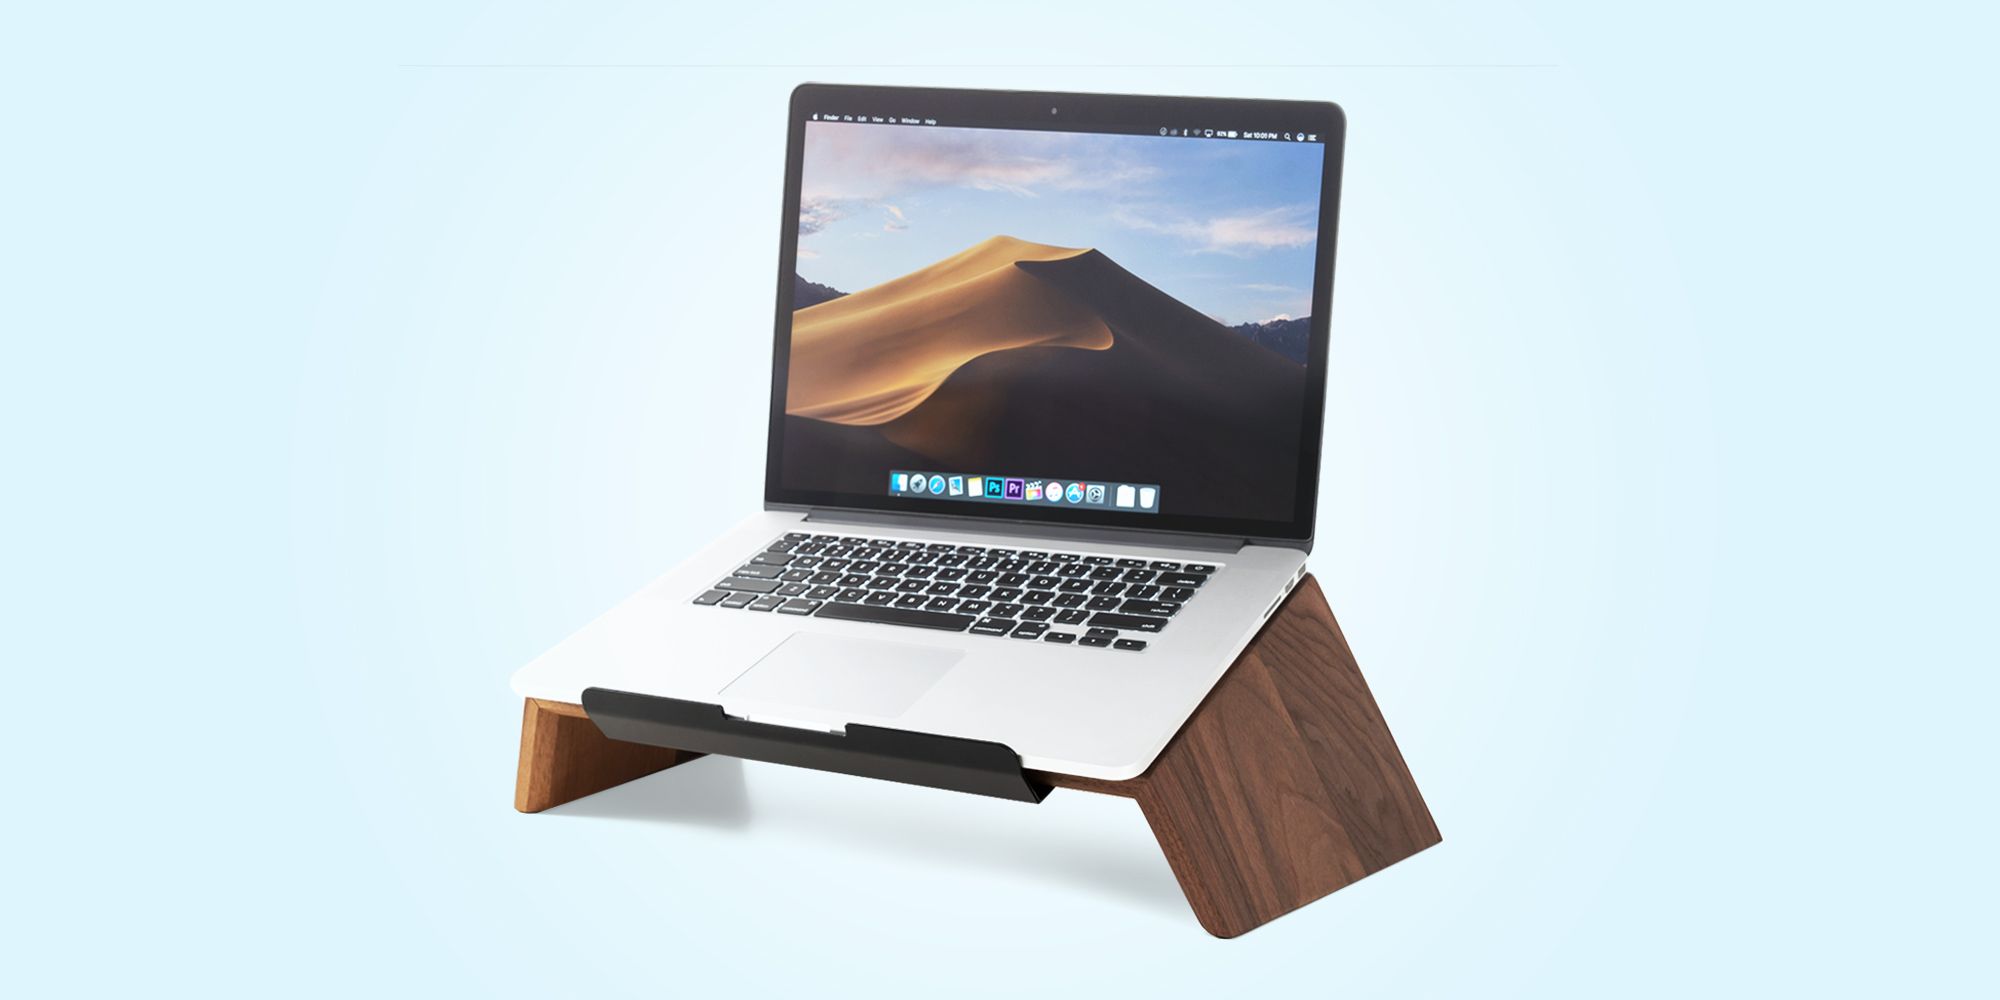 Paradox Rouwen Panda 20 Best MacBook Accessories 2022 - Mac Stands, Chargers, Monitors